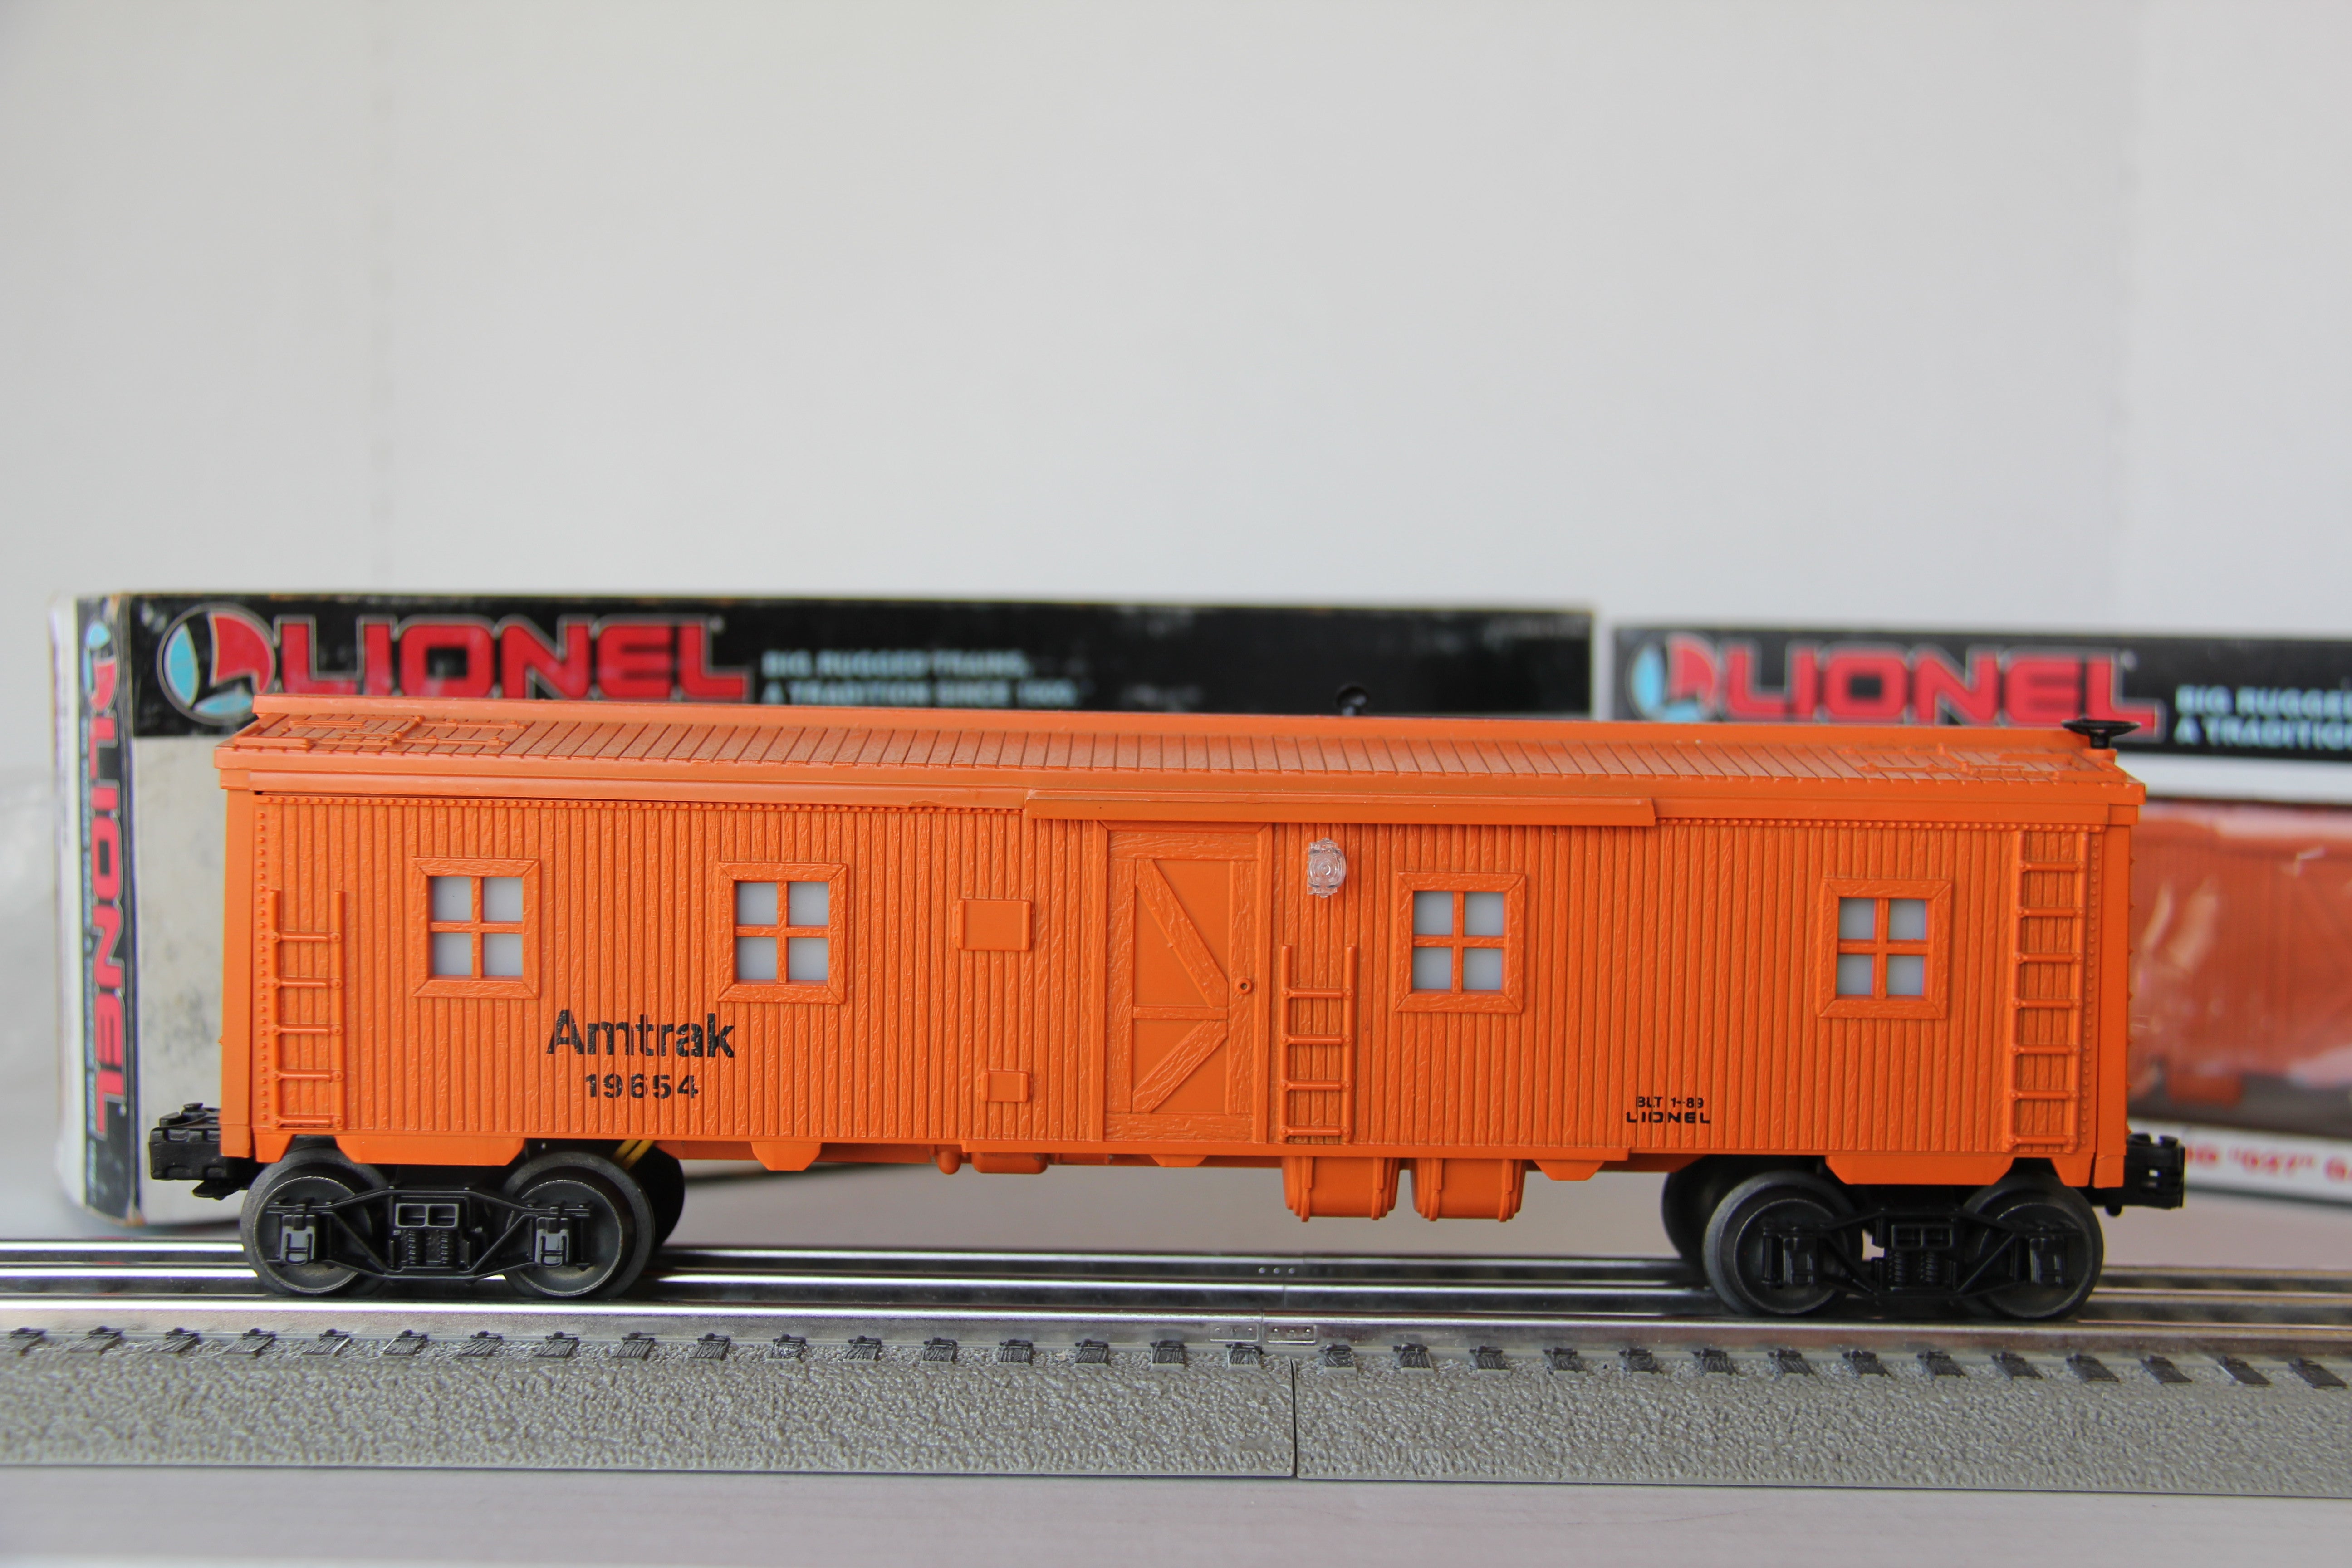 Lionel 6-19654 Amtrak Bunk Car with Lighted Interior 3 Car Set-Second hand-M3964